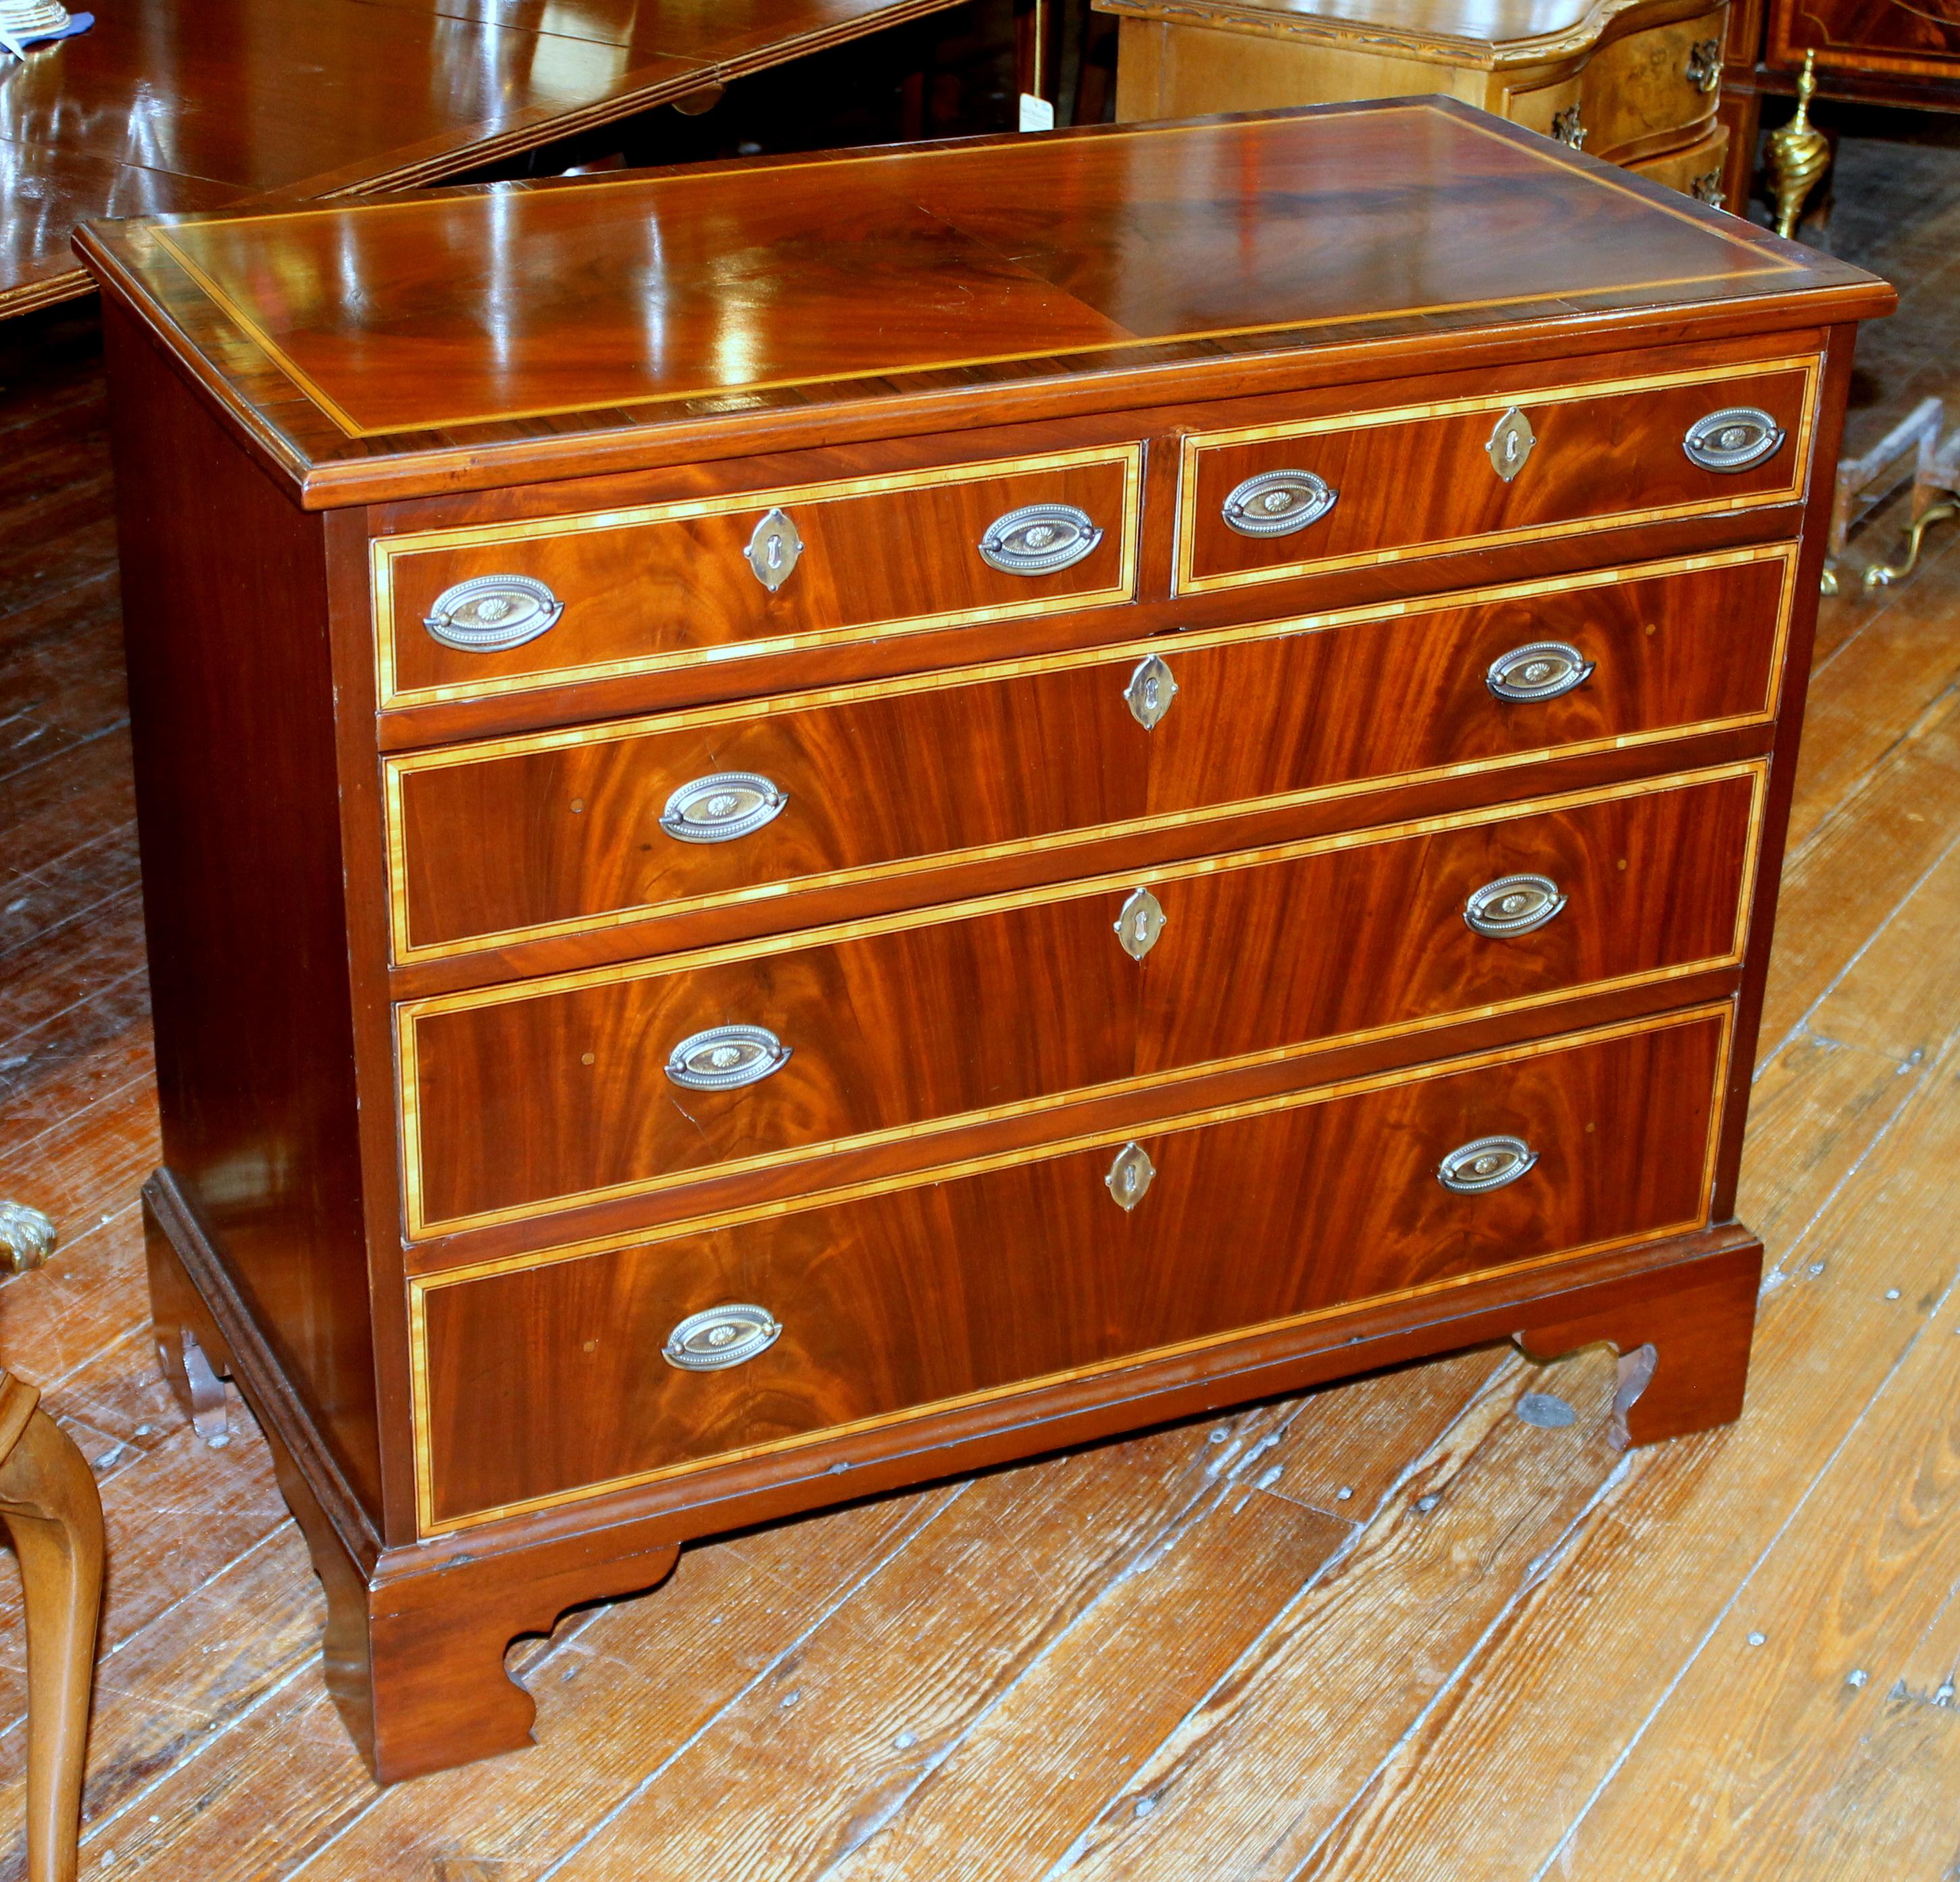 Fabulous quality antique English George III inlaid flame mahogany rare diminutive size low chest of drawers with magnificent book-matched crotch mahogany. Even the top is beautifully book-matched quartered and veneered flame mahogany.

Please note